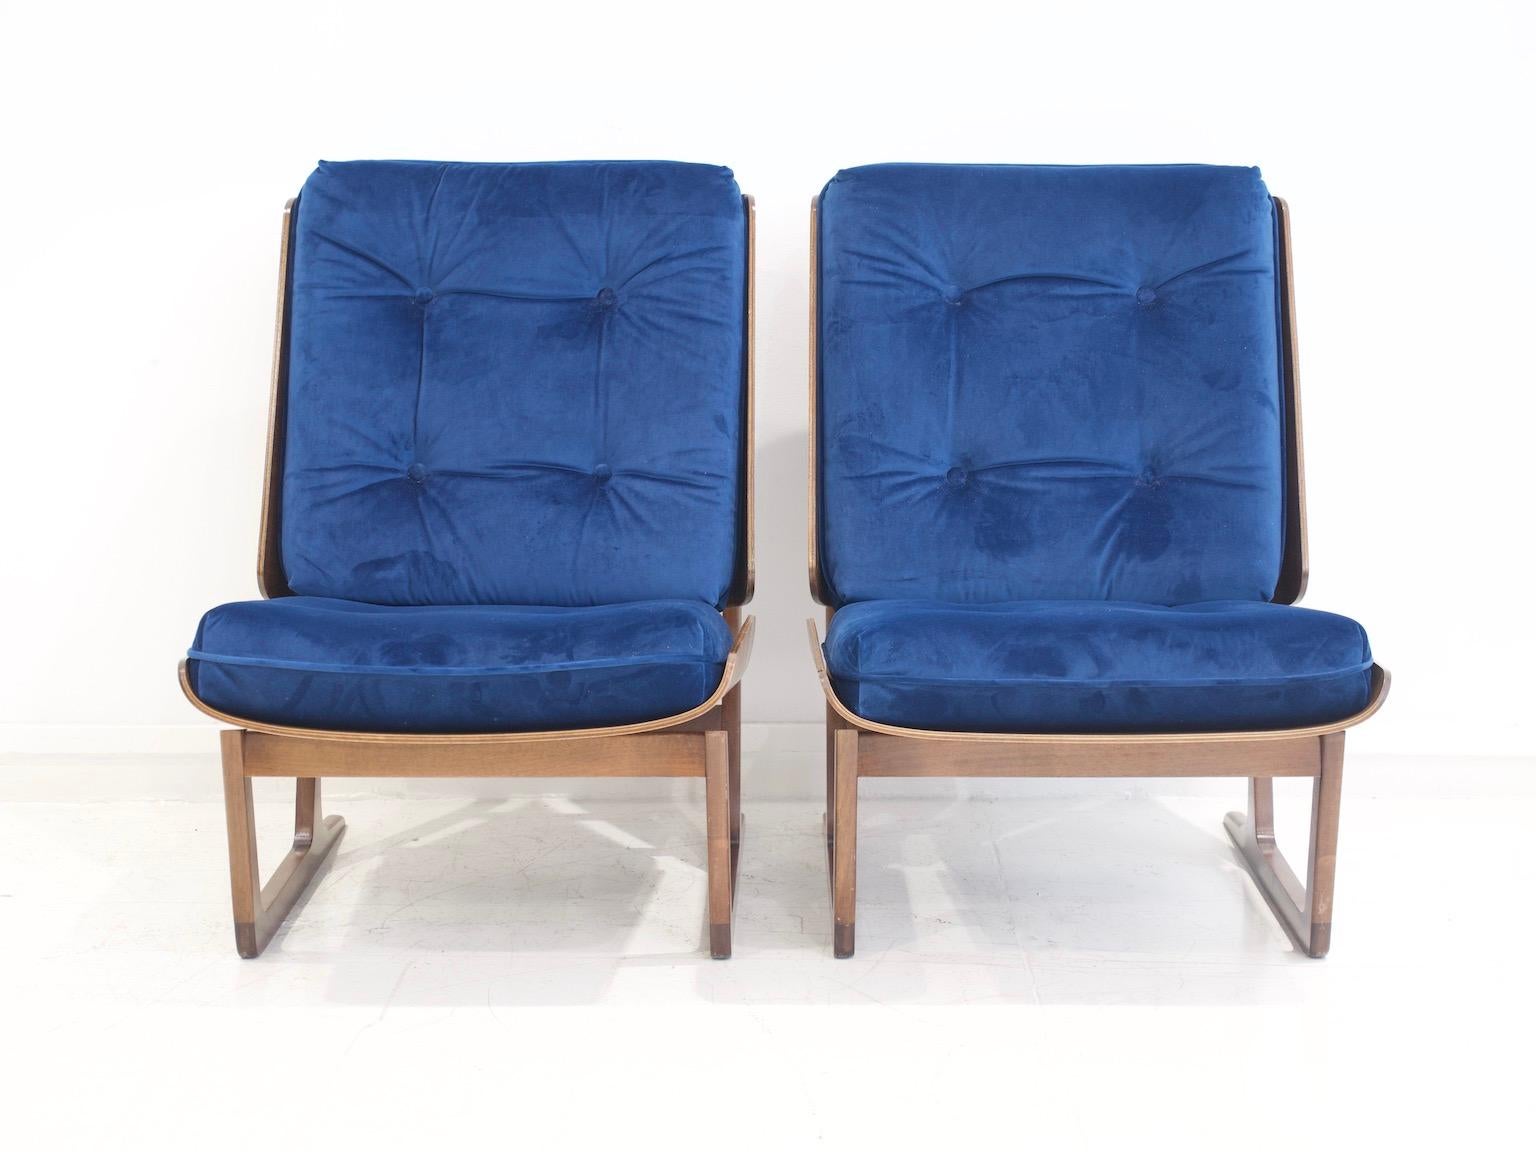 Pair of lounge chairs designed by Hans Juergens for Deco House in the early 1960s. Molded walnut plywood shell supported by a solid walnut sled-form frame. Cushions later upholstered in royal blue velvet.

The design of this lounge chair was for